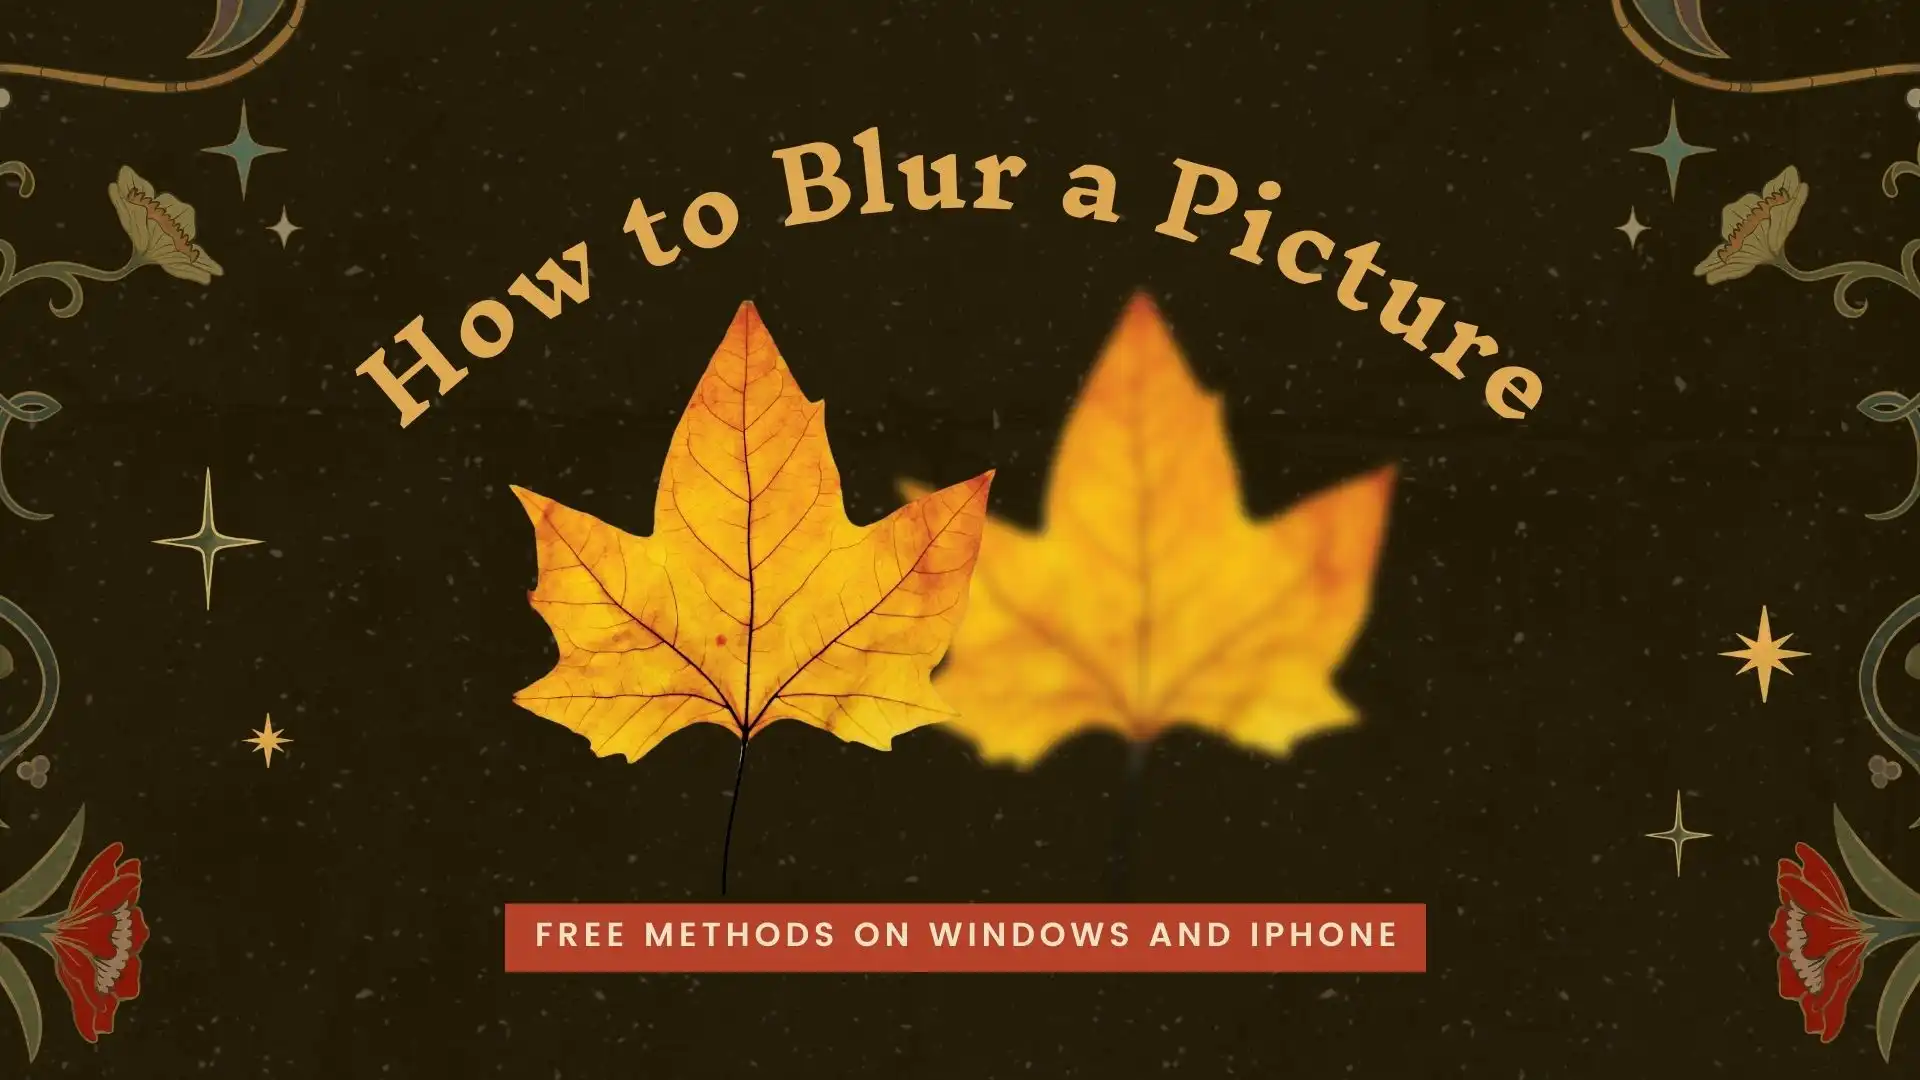 How to Blur a Picture for Free on Windows and iPhone